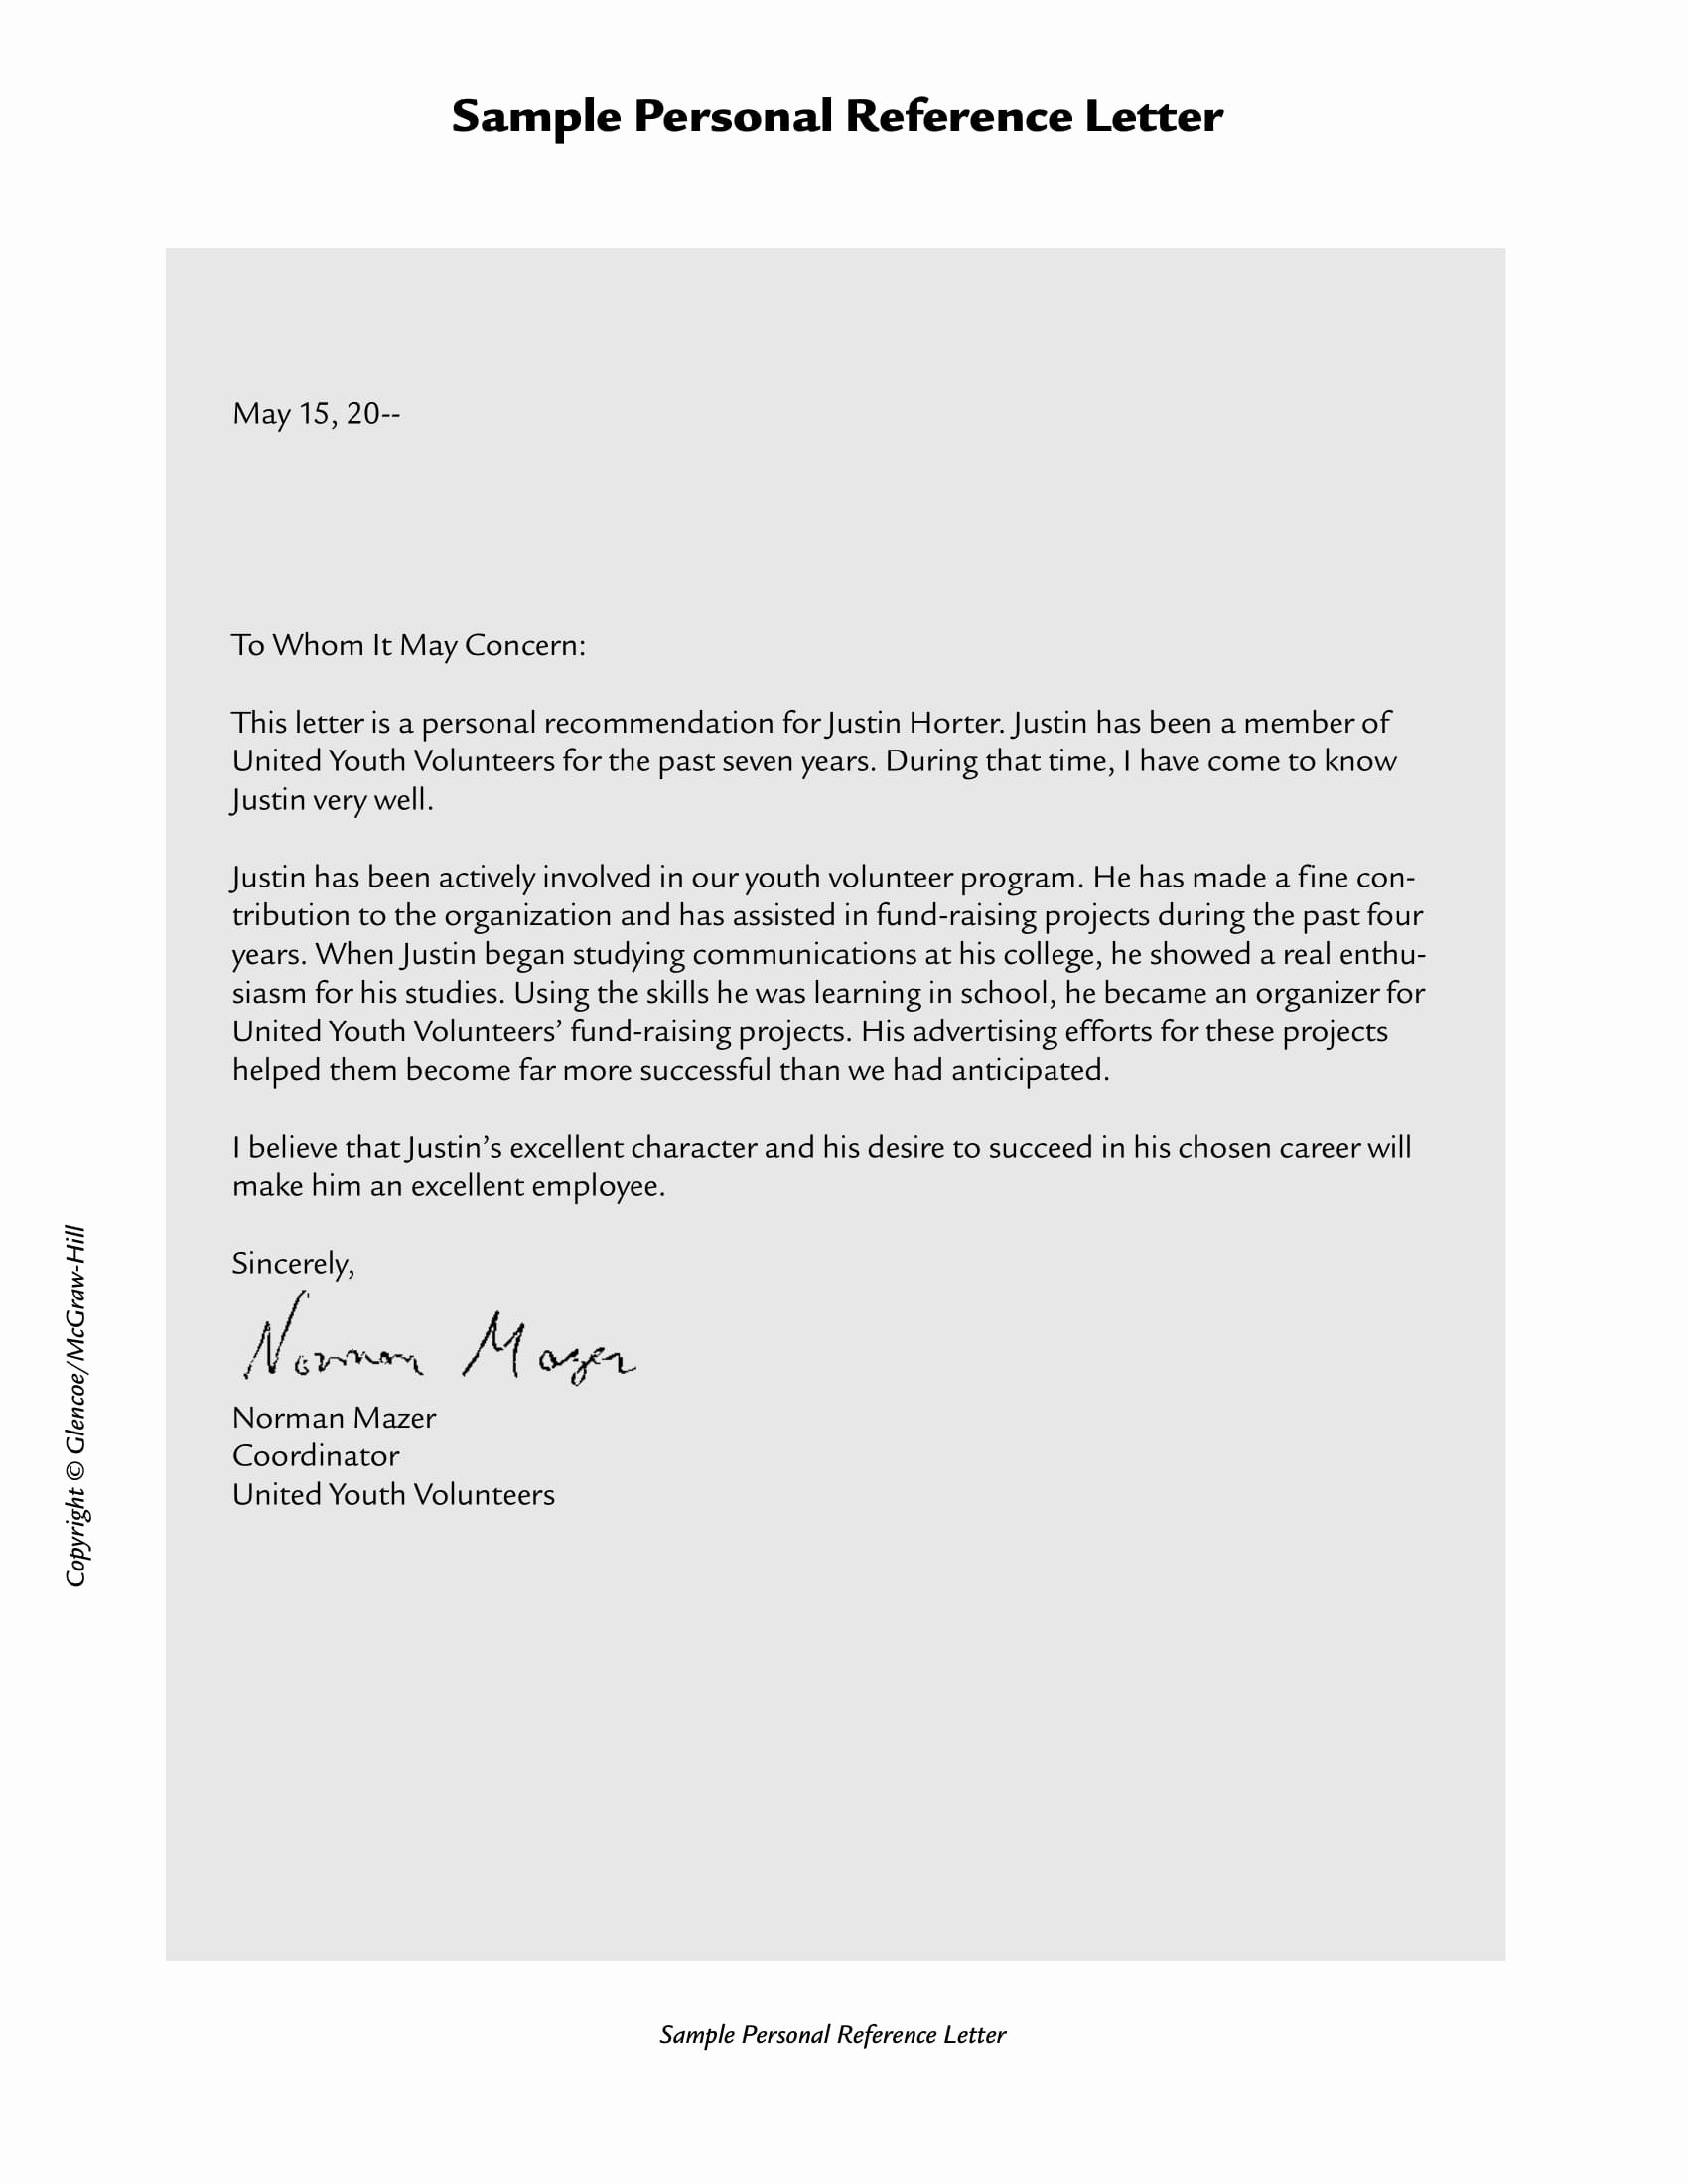 Personal Reference Letter Samples Inspirational 8 Character Reference Letter Examples Pdf